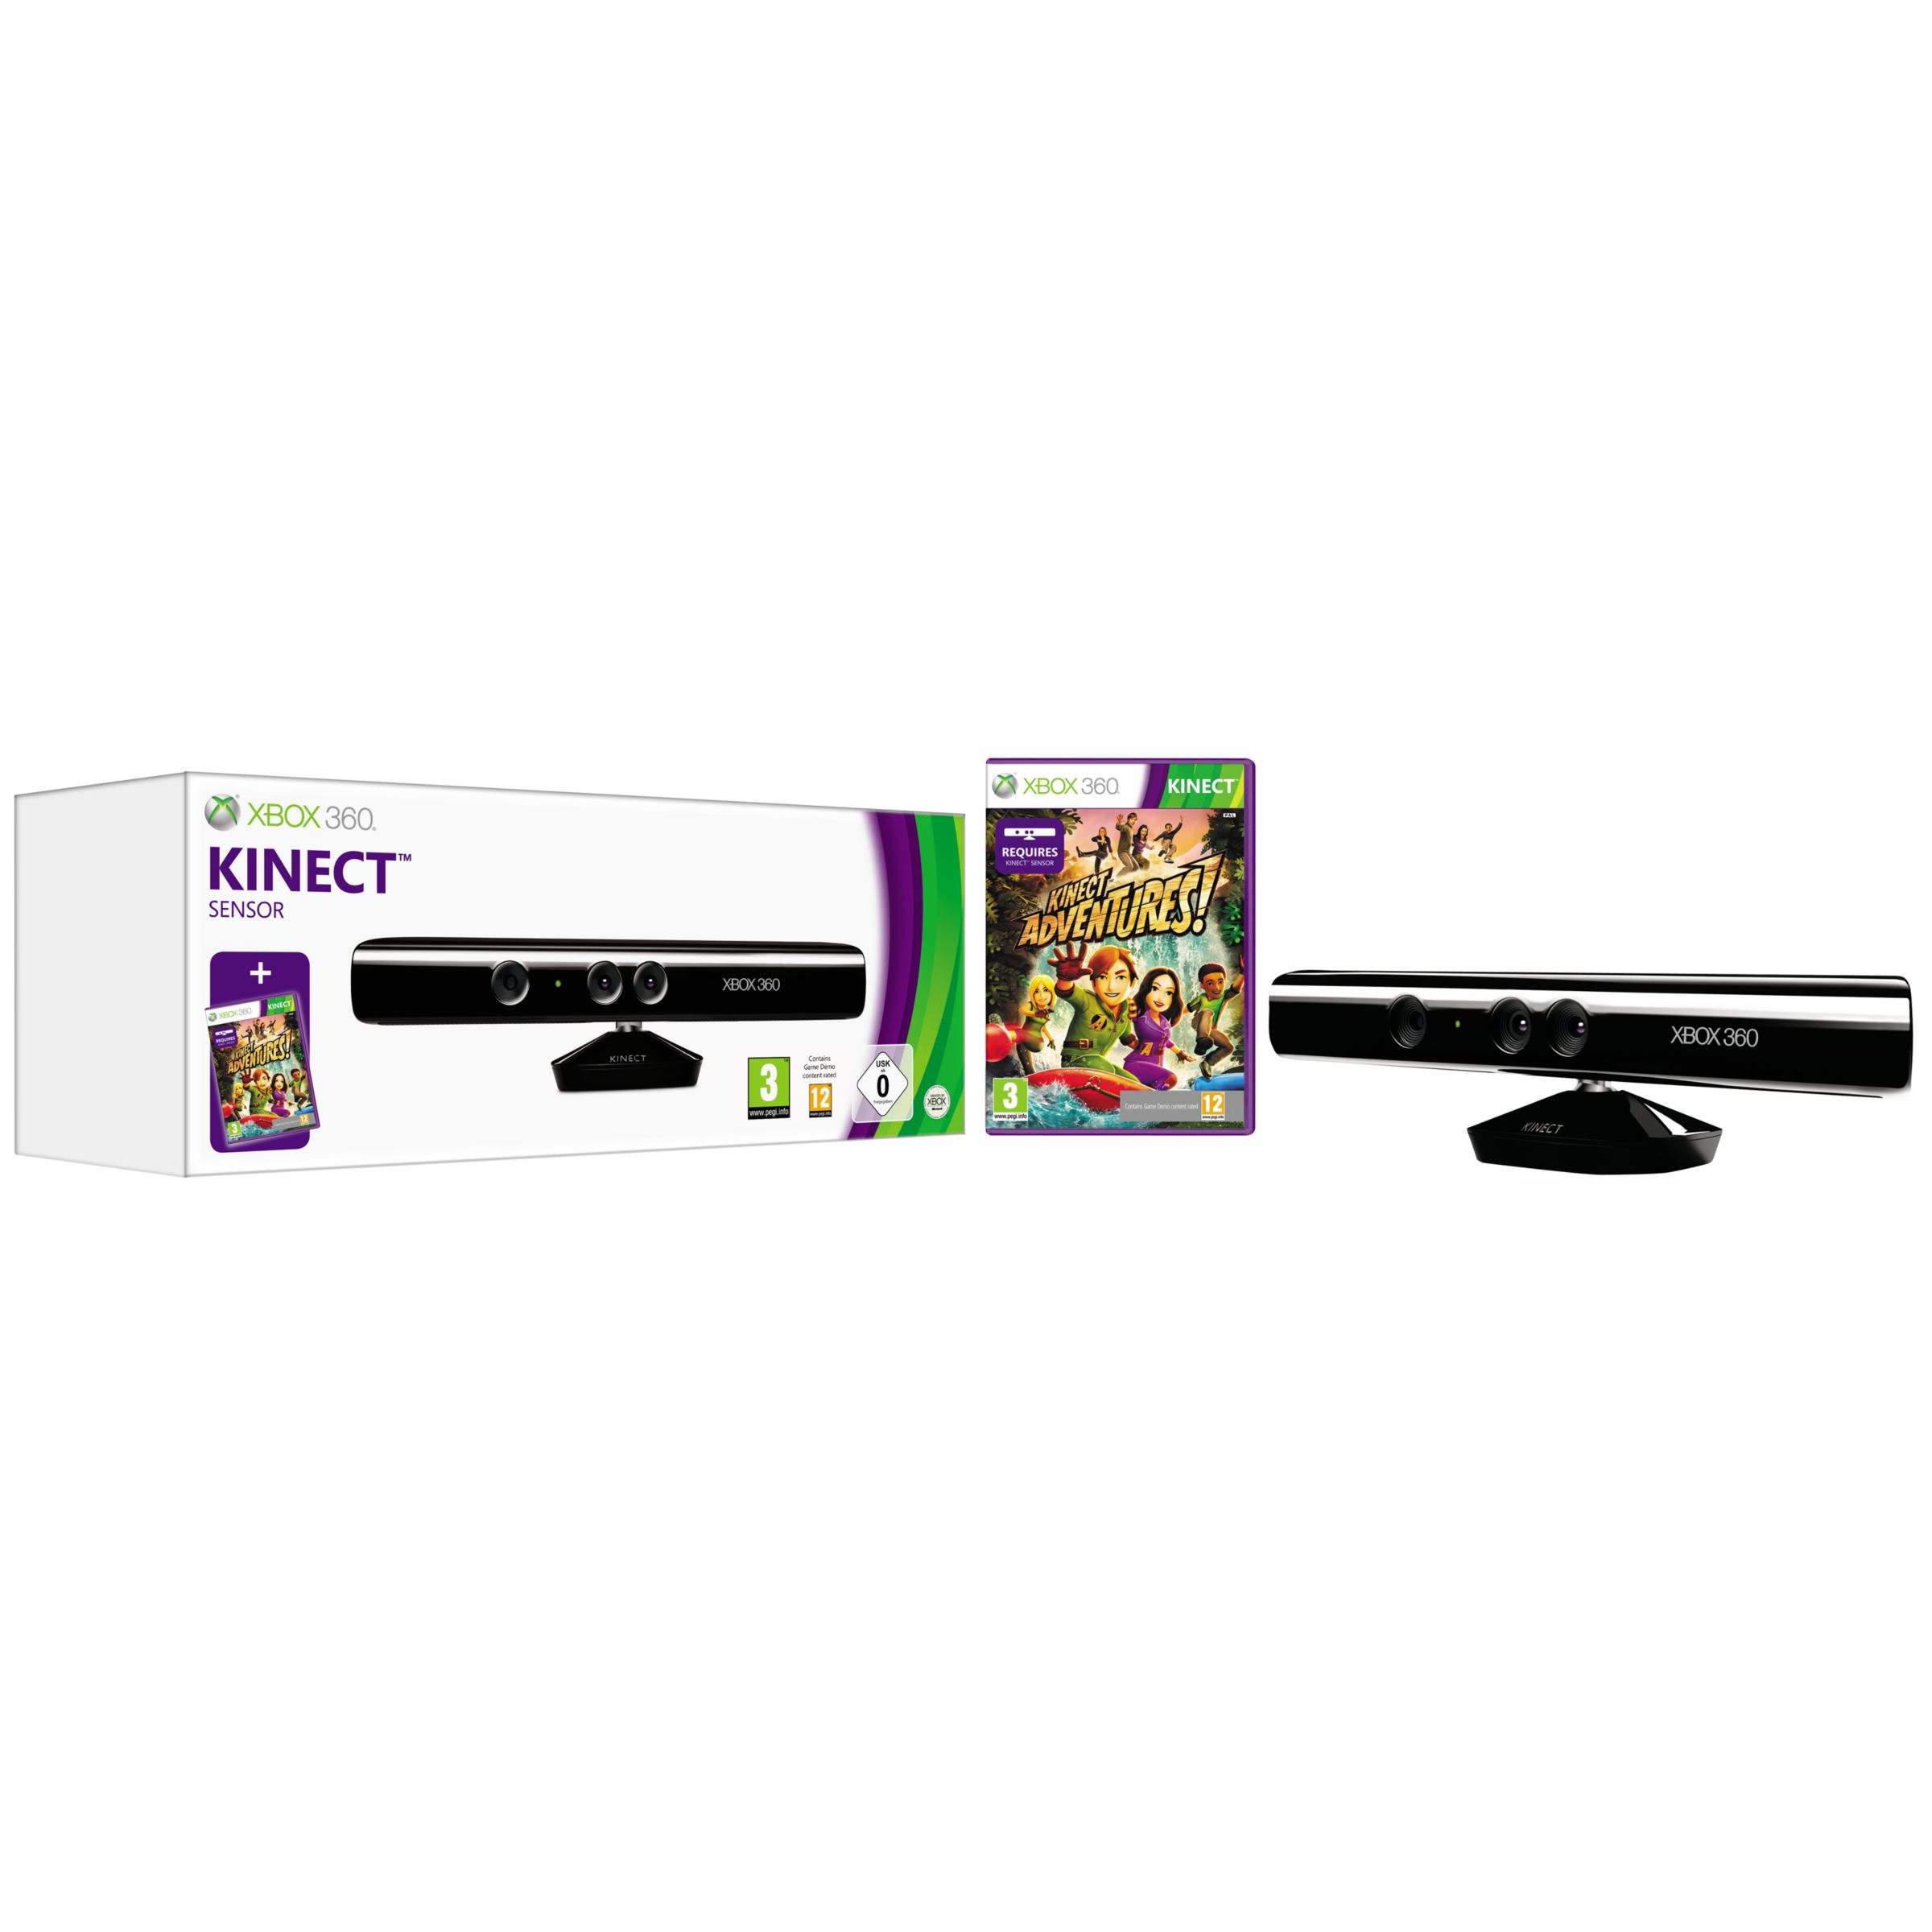 Microsoft Kinect Controller, Joyride & Kinectimals for Xbox 360 at John Lewis